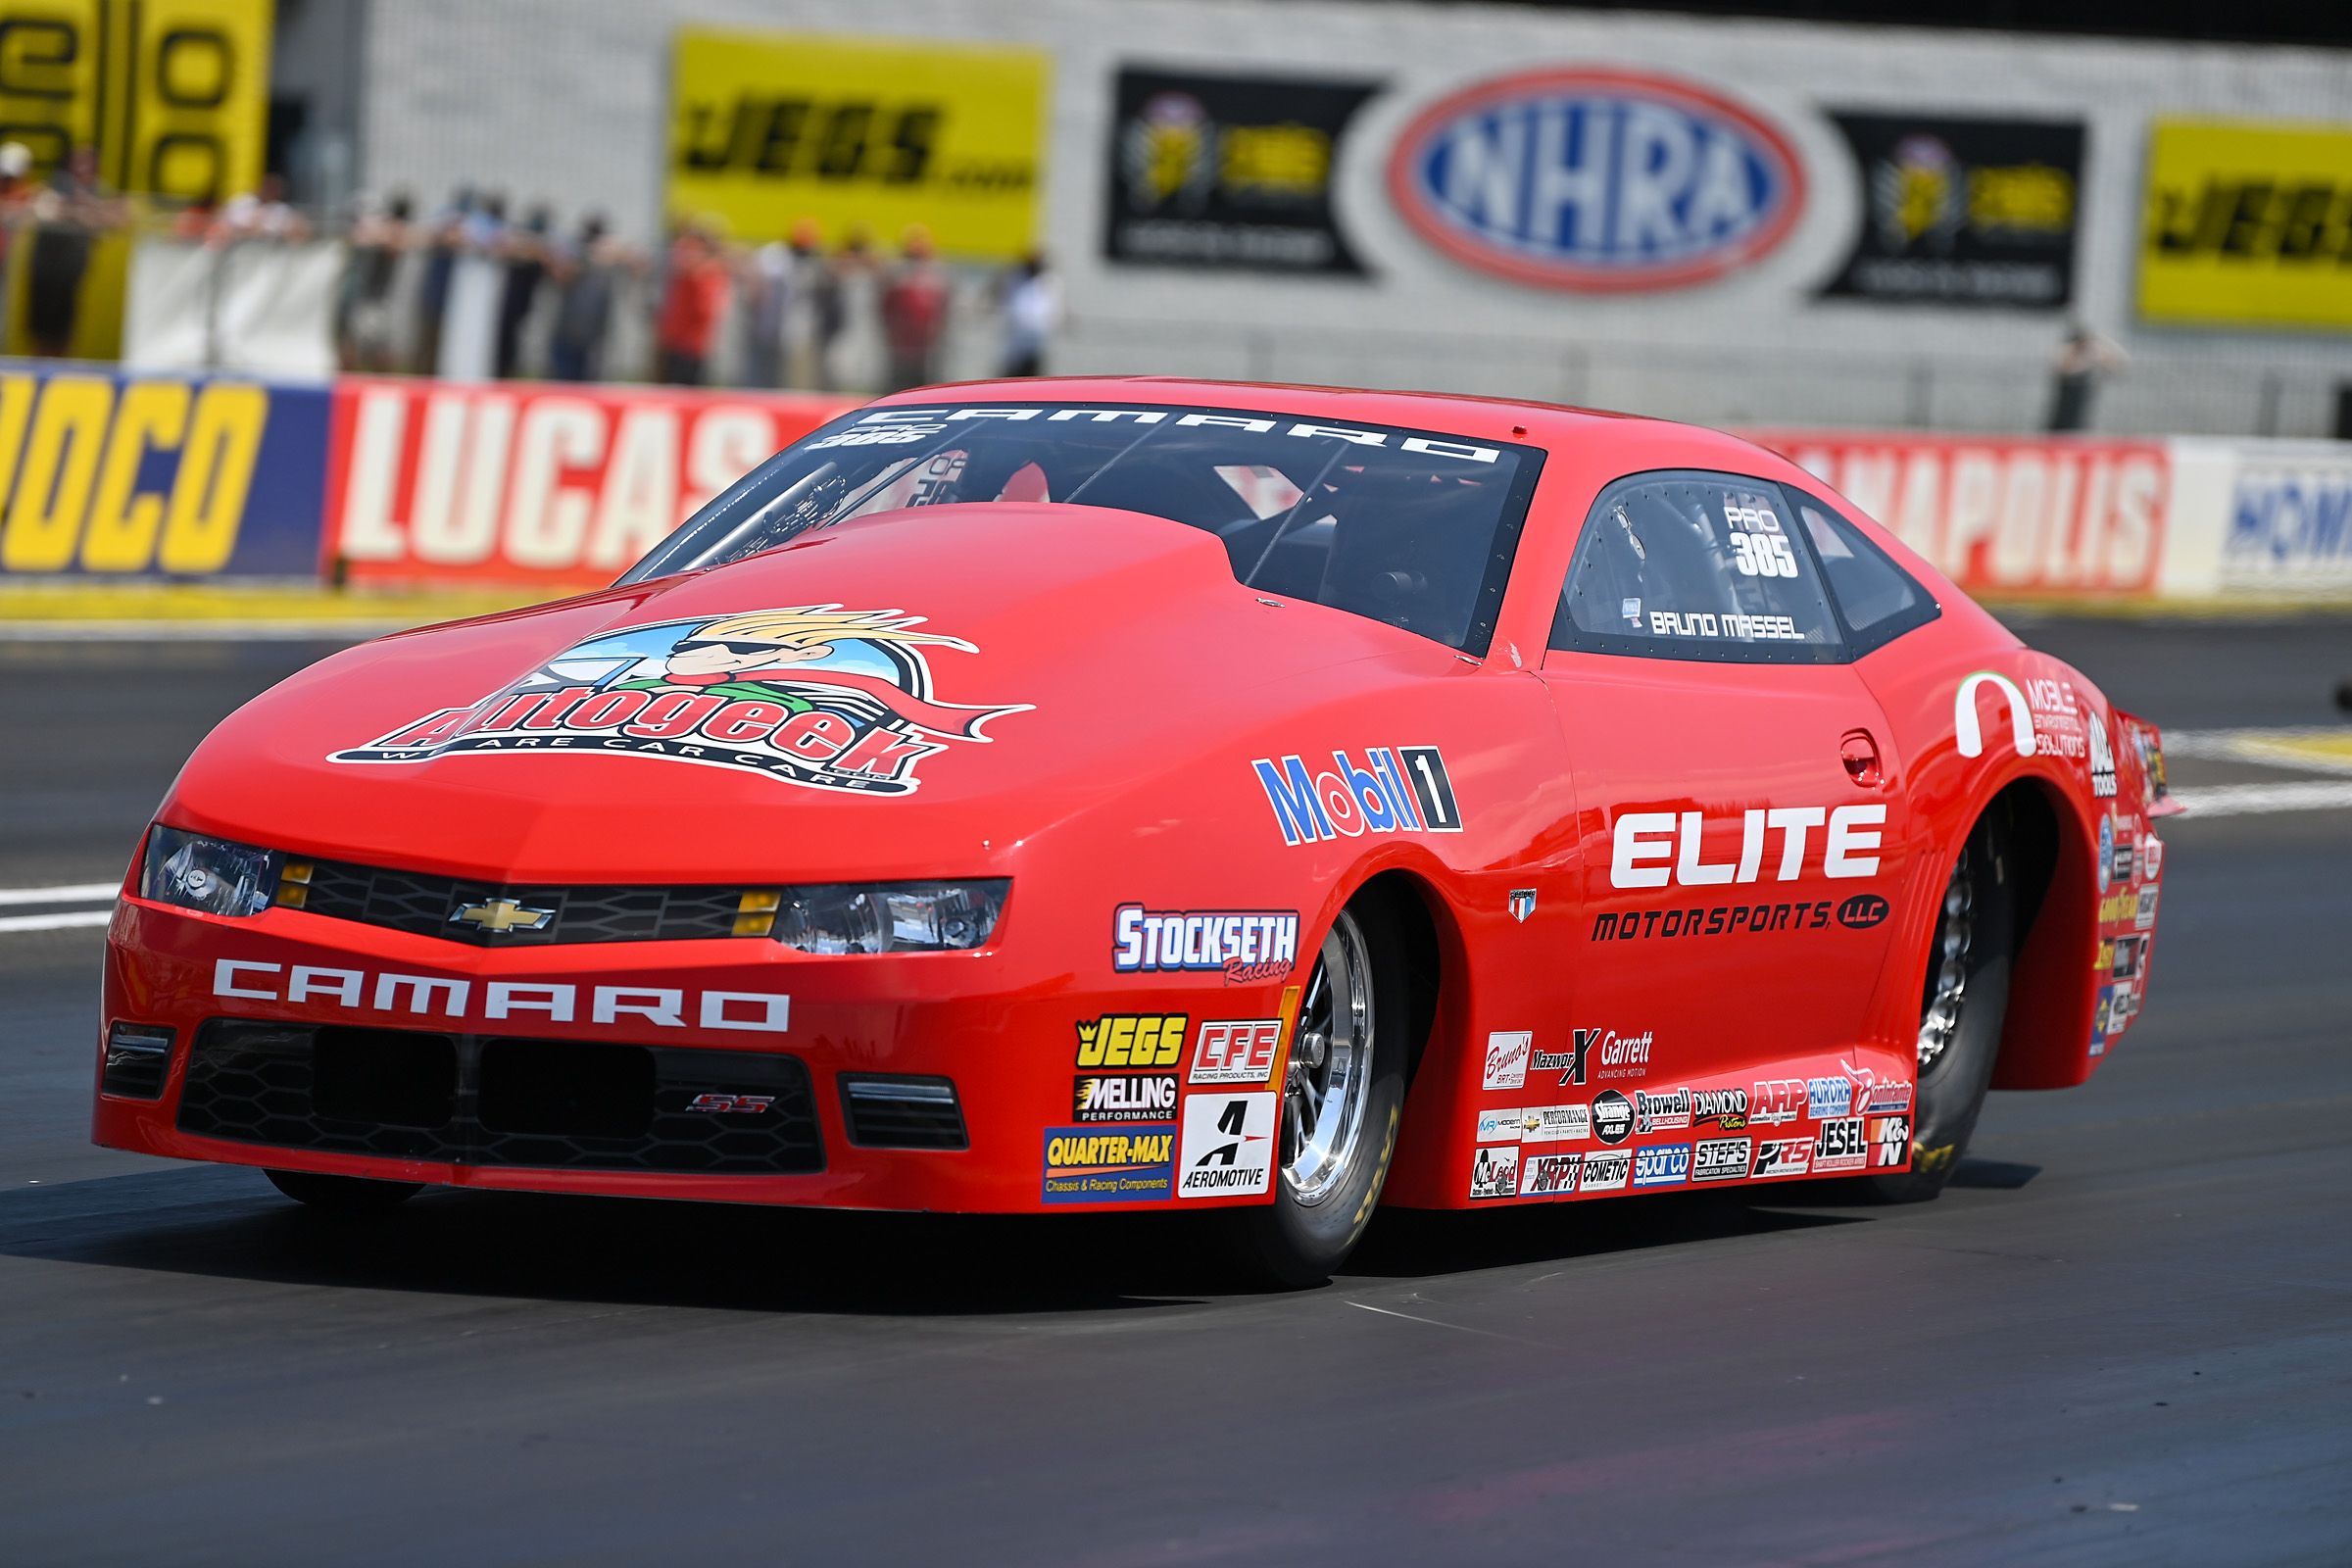 Unexpected Absences Give NHRA Privateers, Newcomers a Chance to Shine